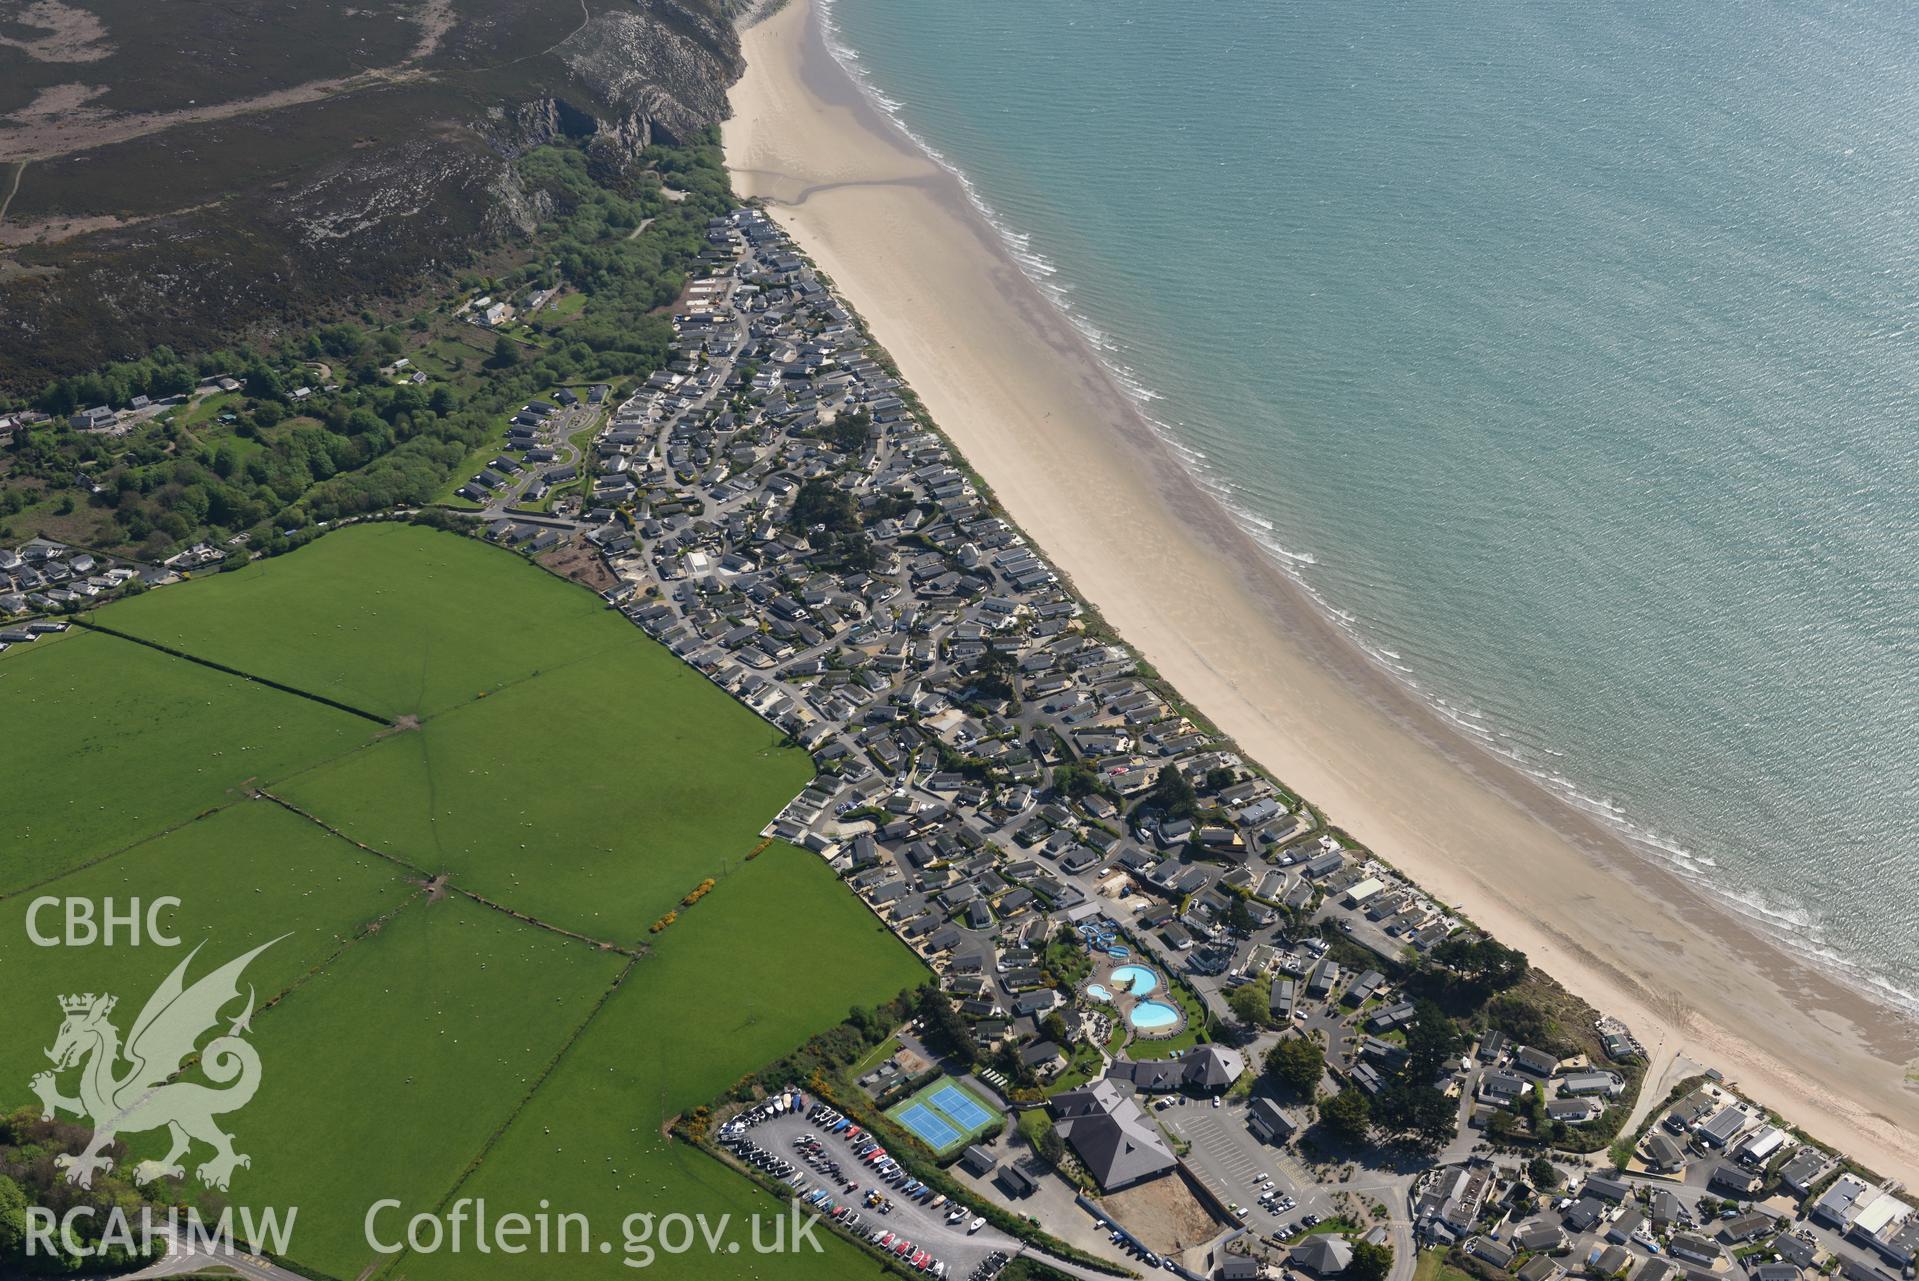 Aerial photography of The FOSIL and The Warren beach, at high tide, taken on 3rd May 2017.  Baseline aerial reconnaissance survey for the CHERISH Project. ? Crown: CHERISH PROJECT 2017. Produced with EU funds through the Ireland Wales Co-operation Programme 2014-2020. All material made freely available through the Open Government Licence.